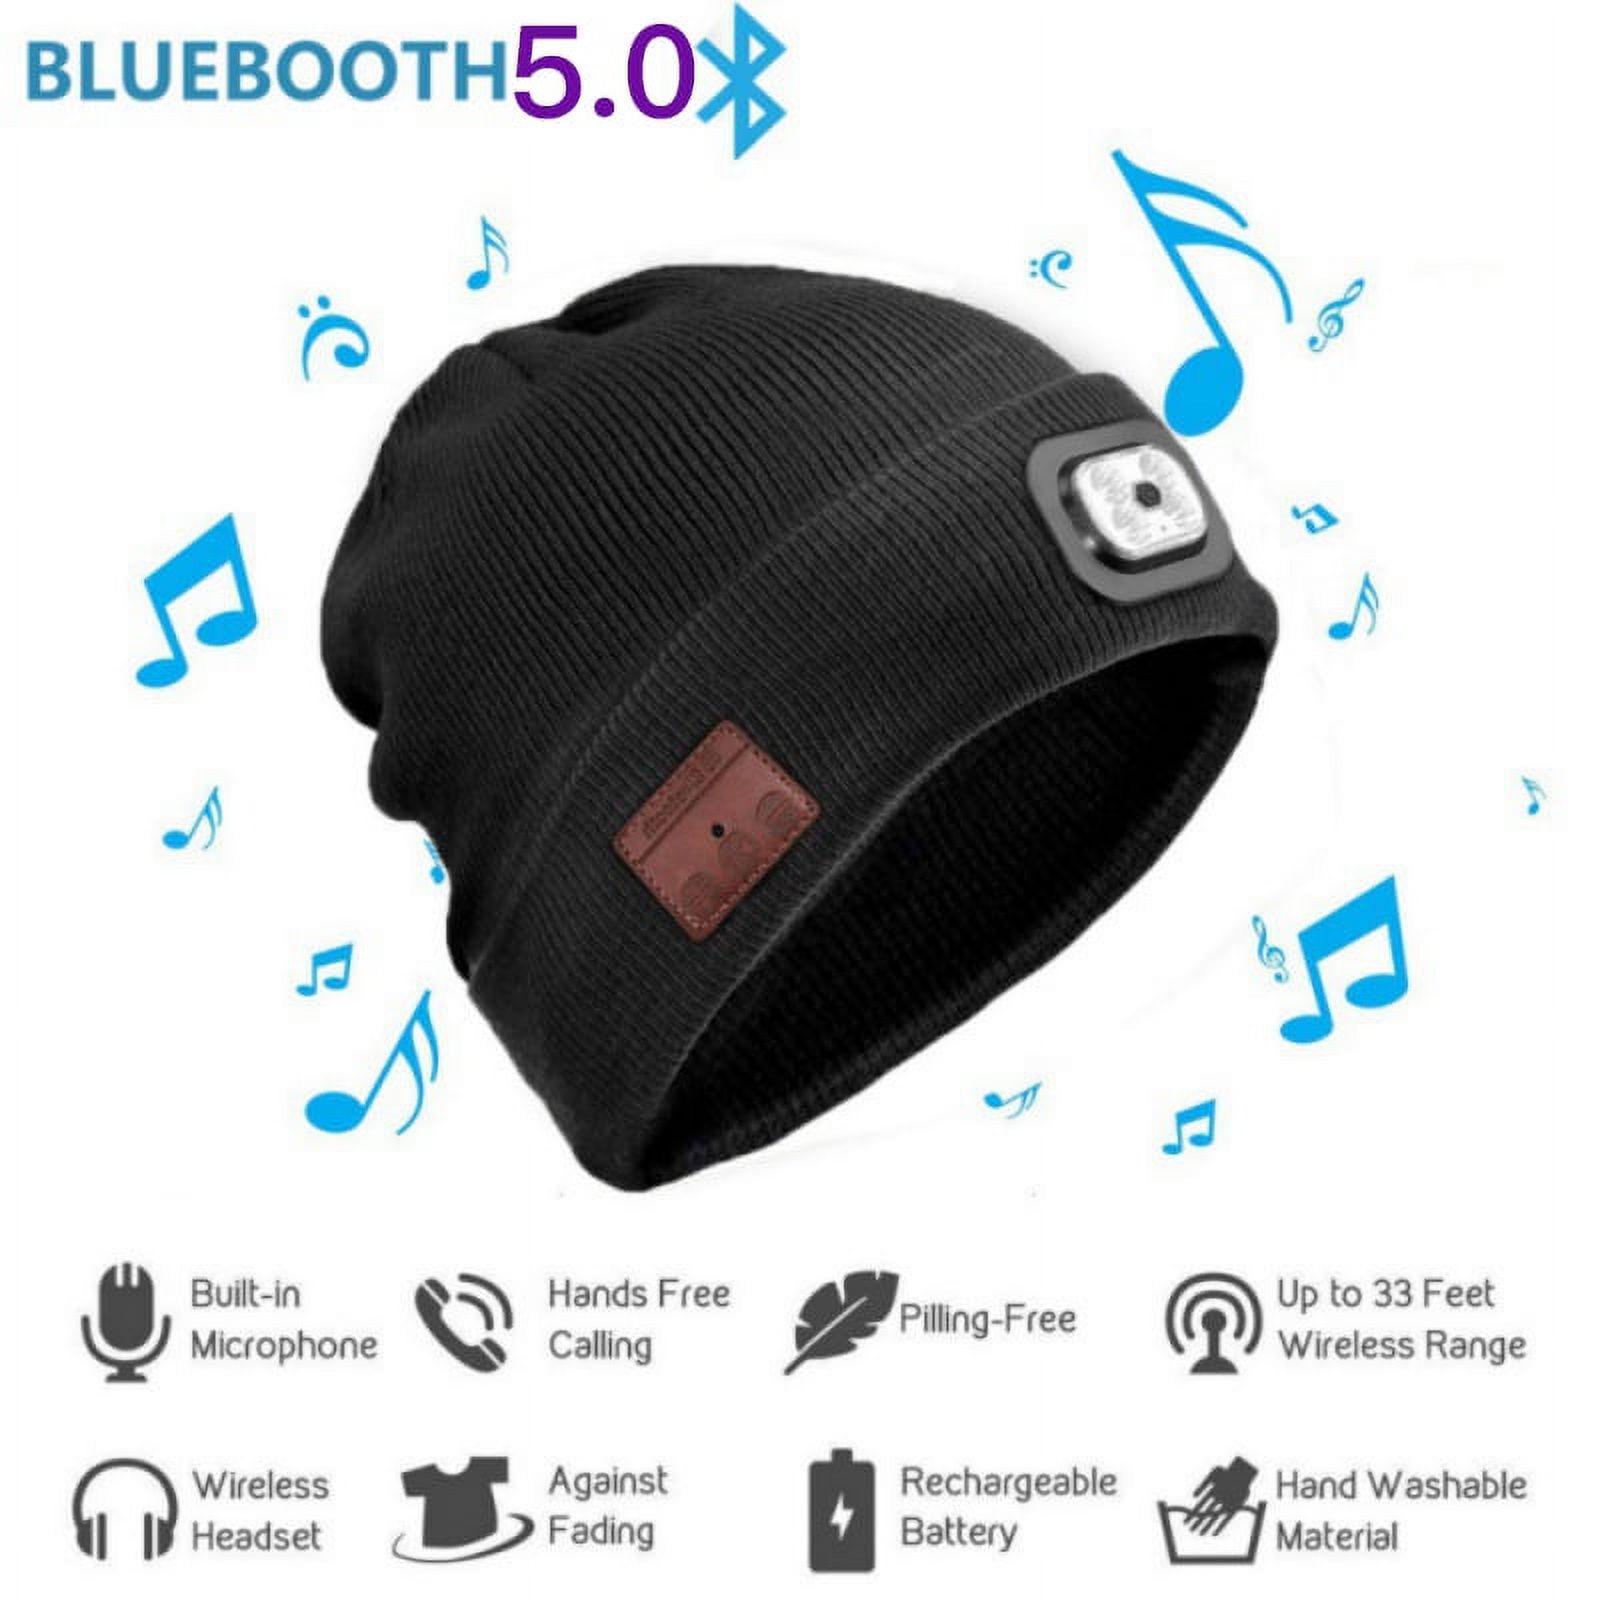 Poseca Bluetooth Beanie Hat LED Beanie Hat, Unisex Wireless Headphone Beanie USB Rechargeable Lighted Cap with Built-in HD Stereo Speakers & Mic - image 1 of 7